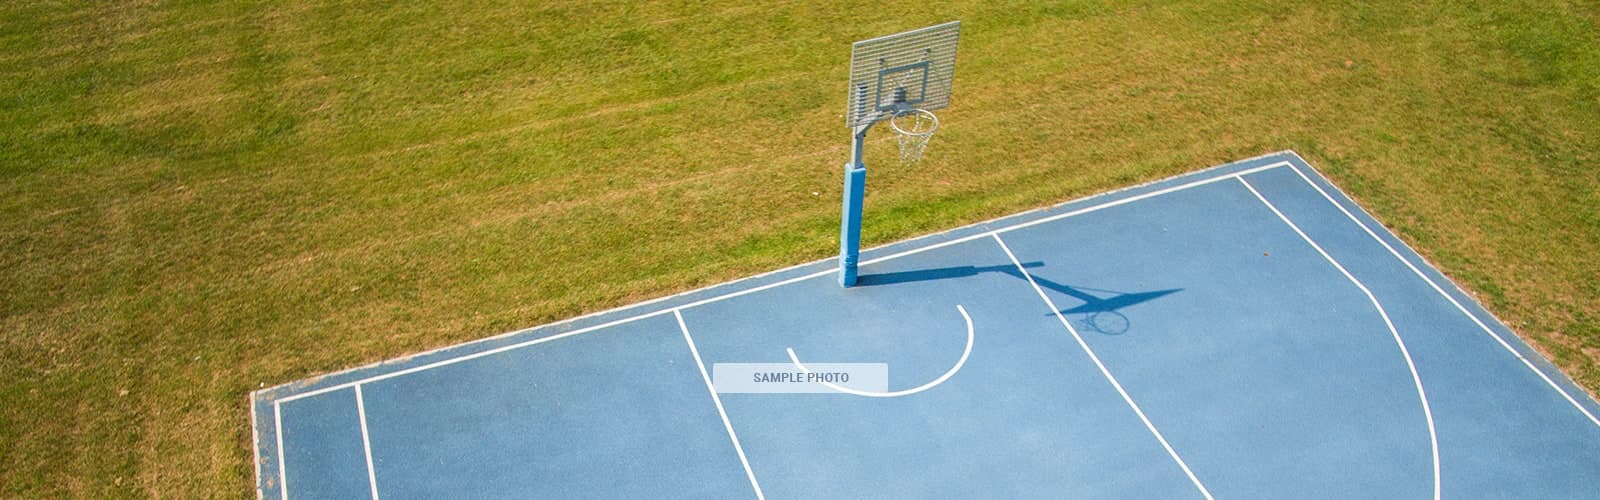 Sanders Memorial Elementary School Outdoor Basketball Courts in Land O' Lakes Florida